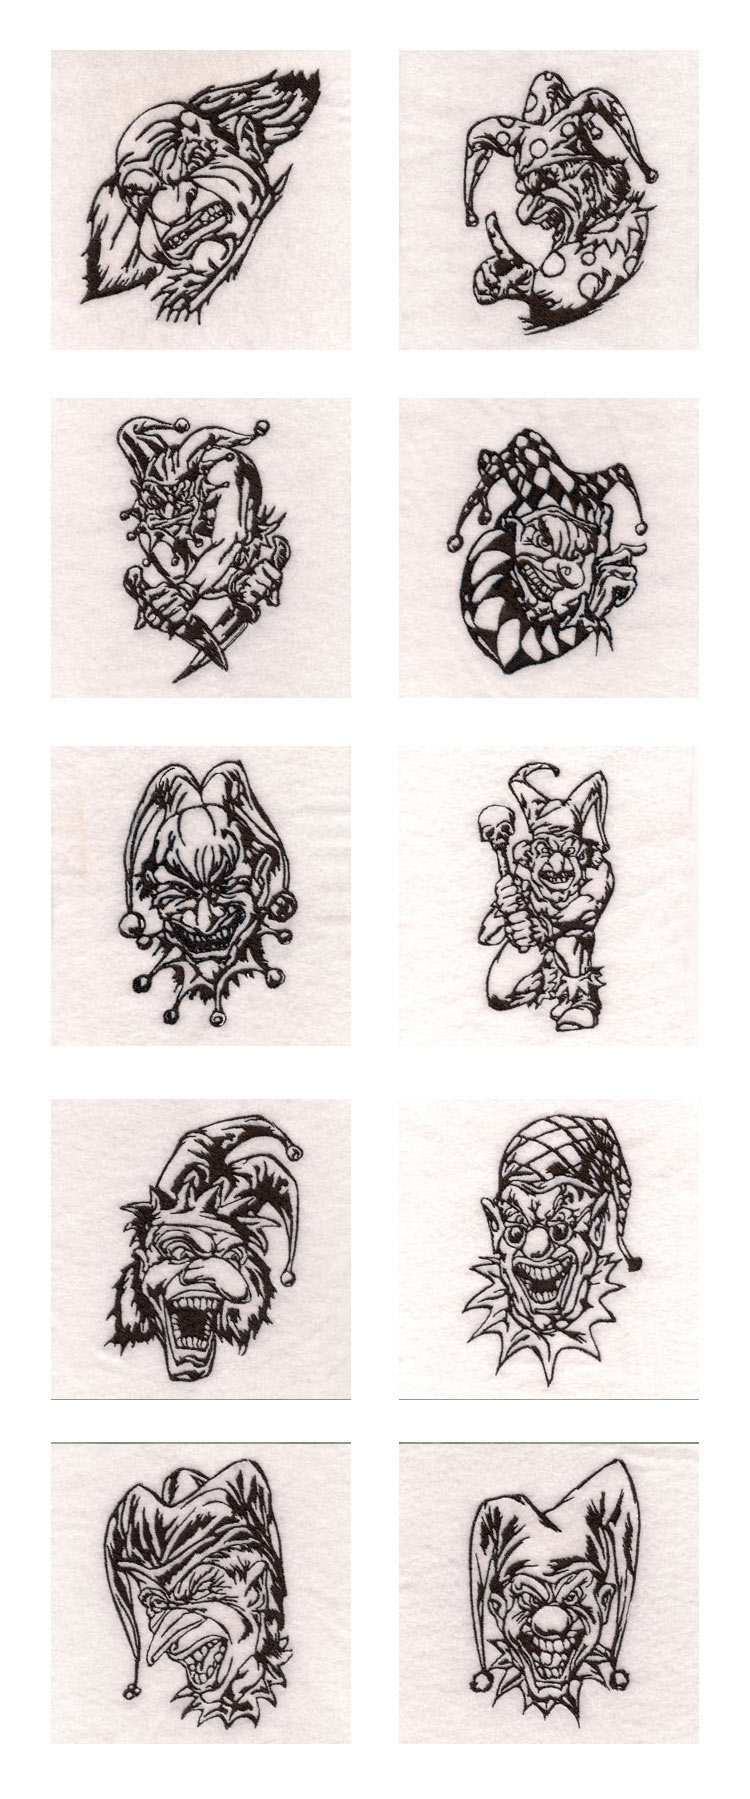 SiCK Scary Clowns Embroidery Machine Design Details